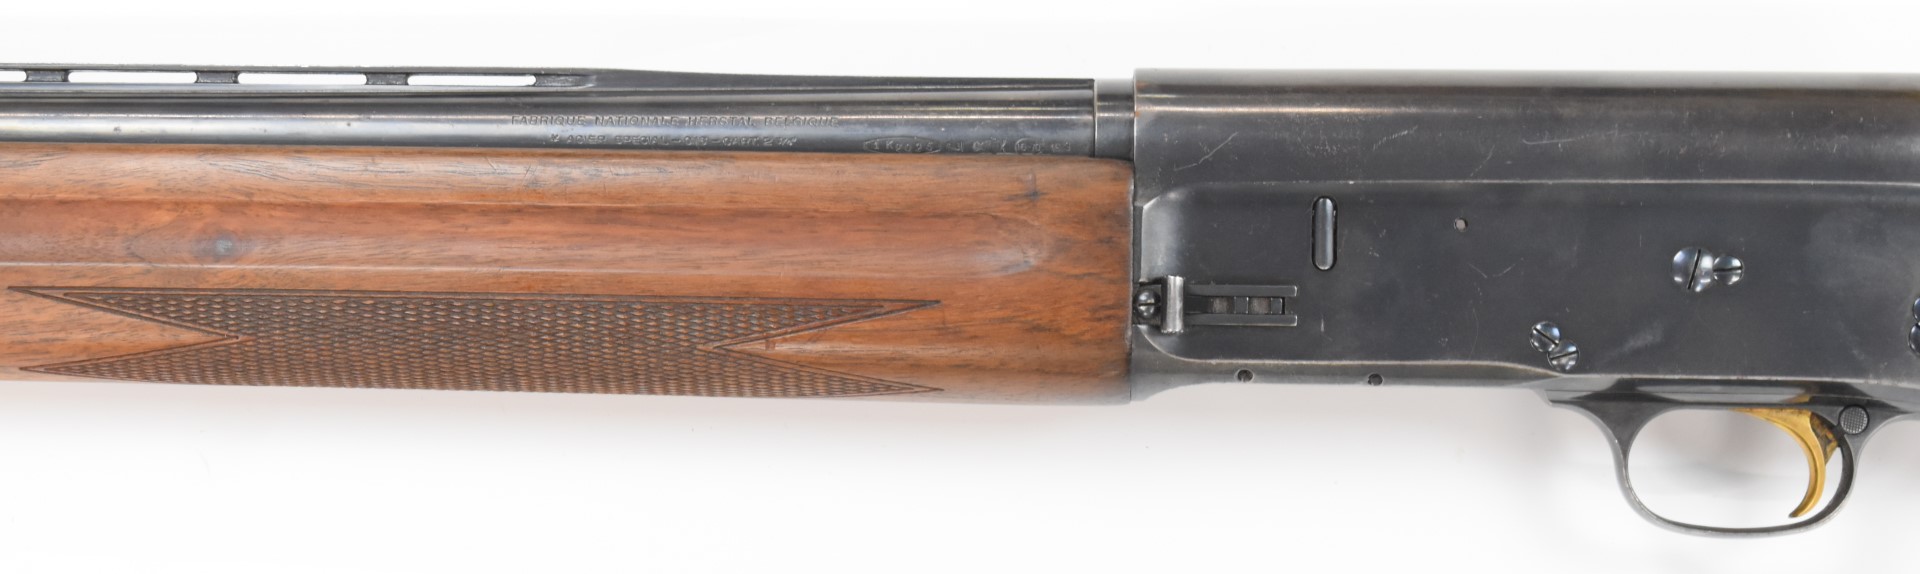 Browning 16 bore 3-shot semi-automatic shotgun with chequered semi-pistol grip and forend and 27 - Image 14 of 18